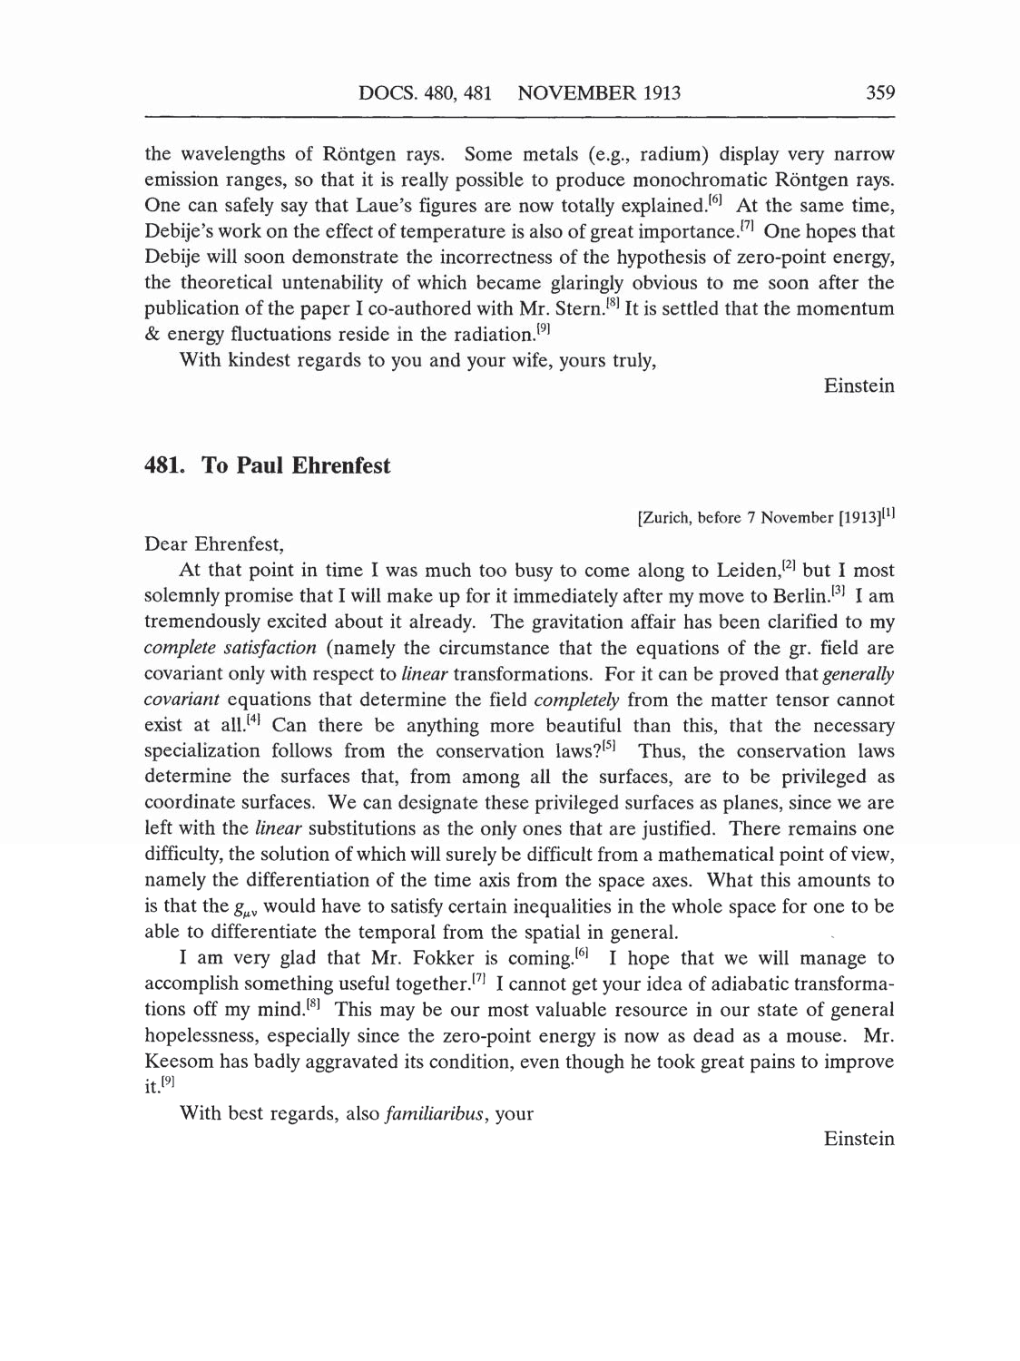 Volume 5: The Swiss Years: Correspondence, 1902-1914 (English translation supplement) page 359